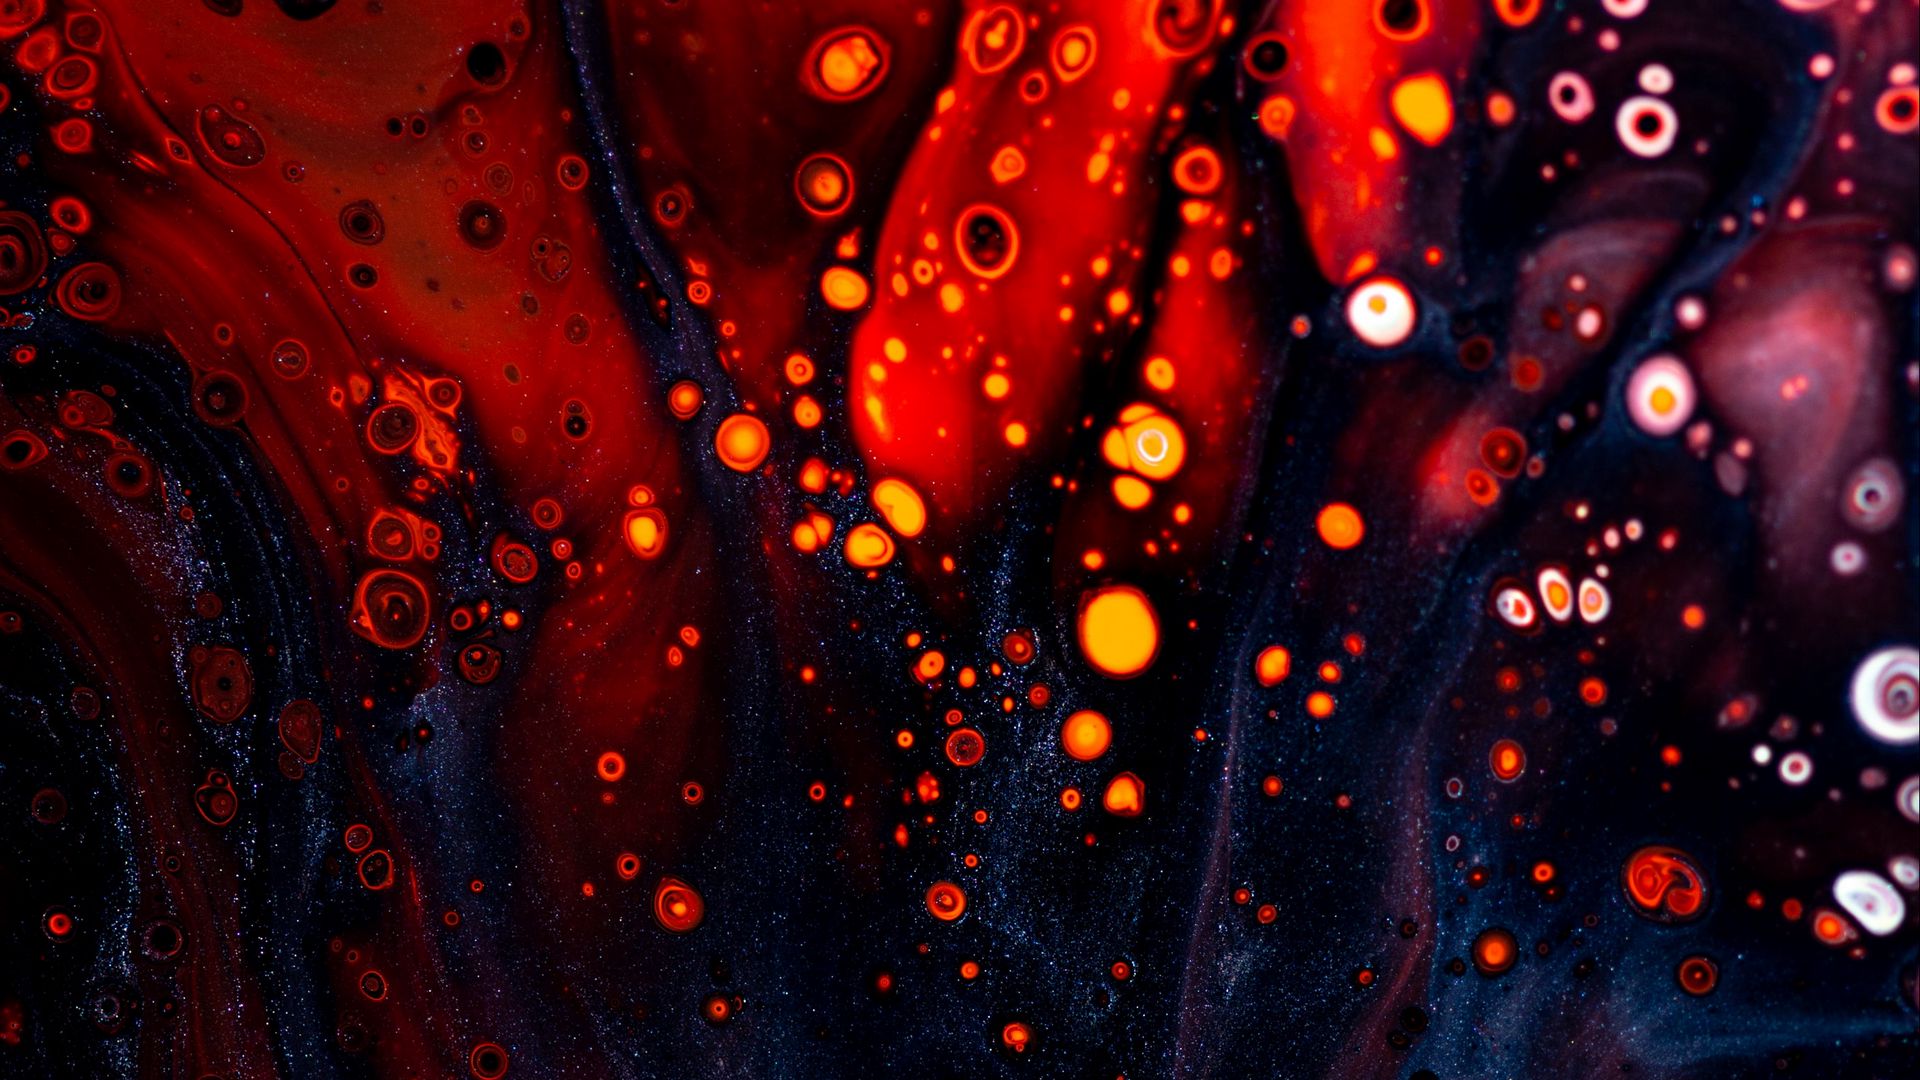 Download wallpaper 1920x1080 stains, spots, bubbles, paint, abstraction ...